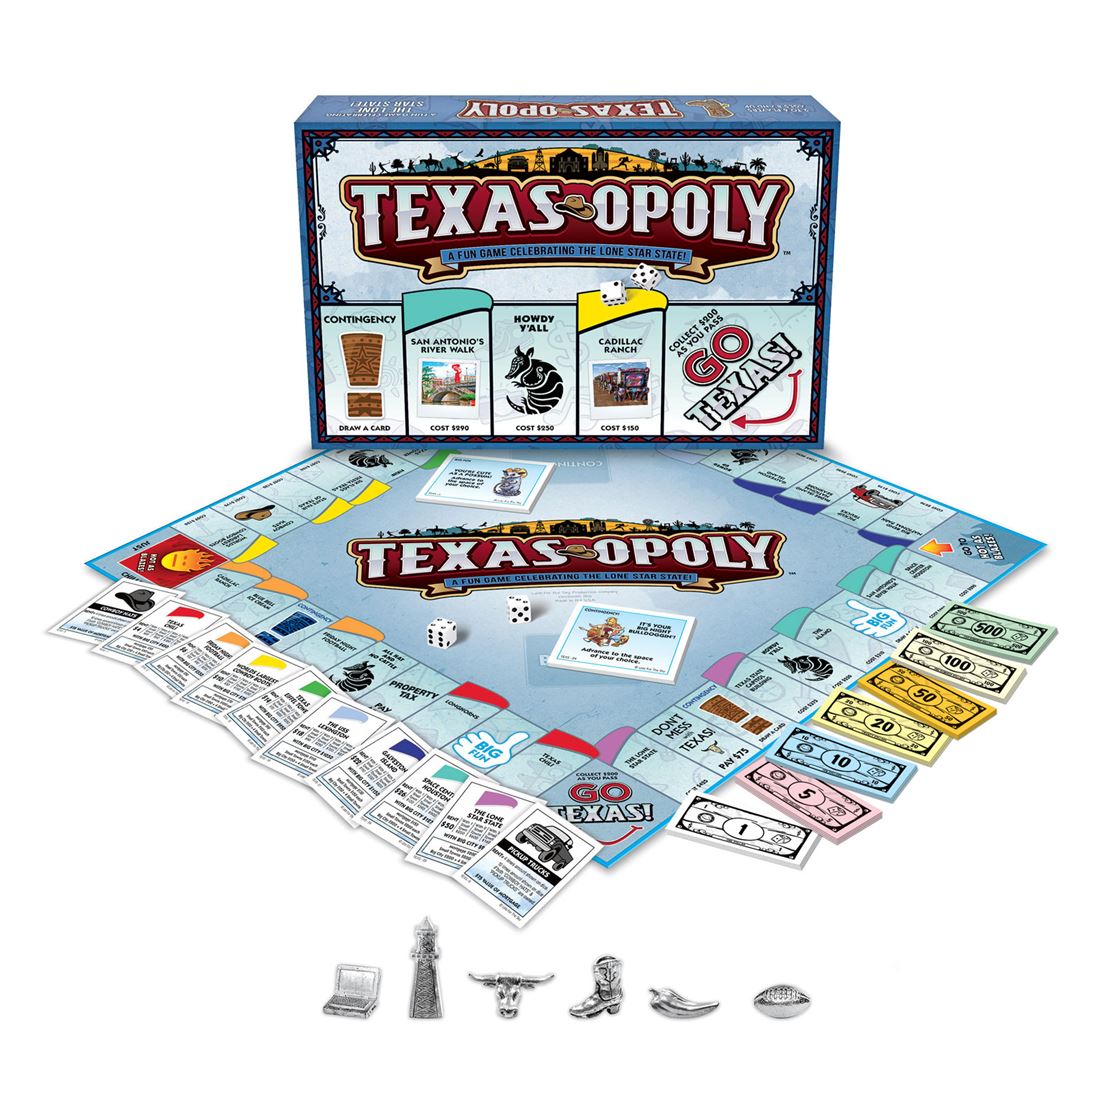 Texas-Opoly - The Monopoly Board Game for Texans